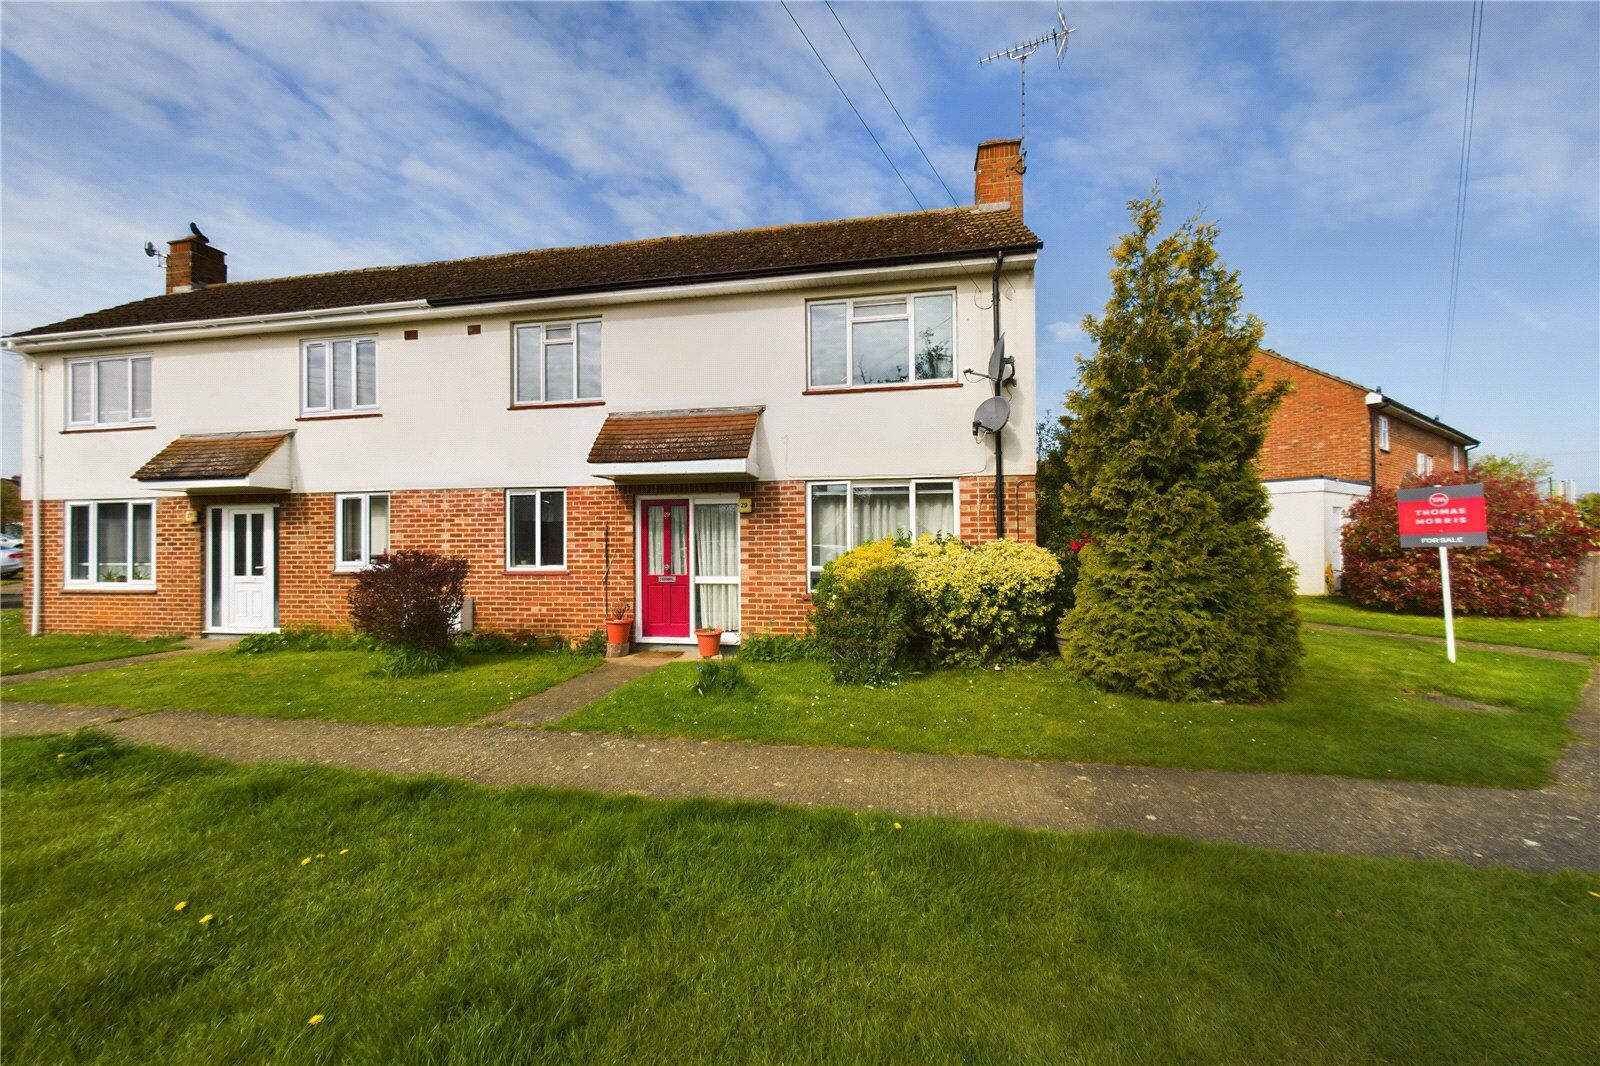 3 bedroom semi detached house for sale Sussex Road, Wyton, PE28, main image